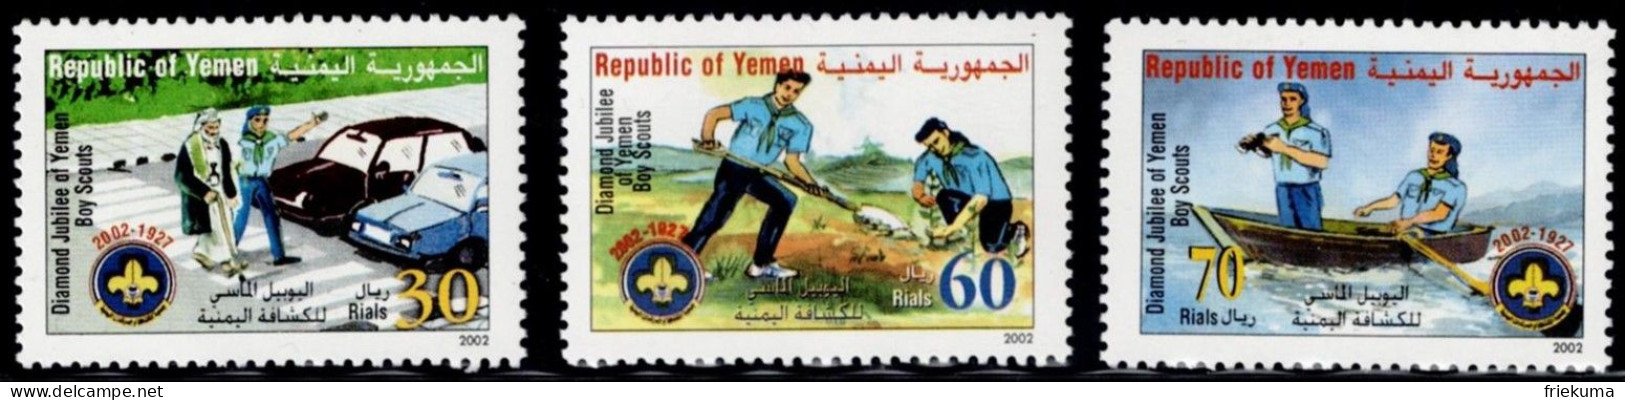 Republic Of Yemen 2002, Scout Helps Man Across The Road, They Plant Seedlings, They Sit In The Rowing Boat MiNr. 236-238 - Nuevos